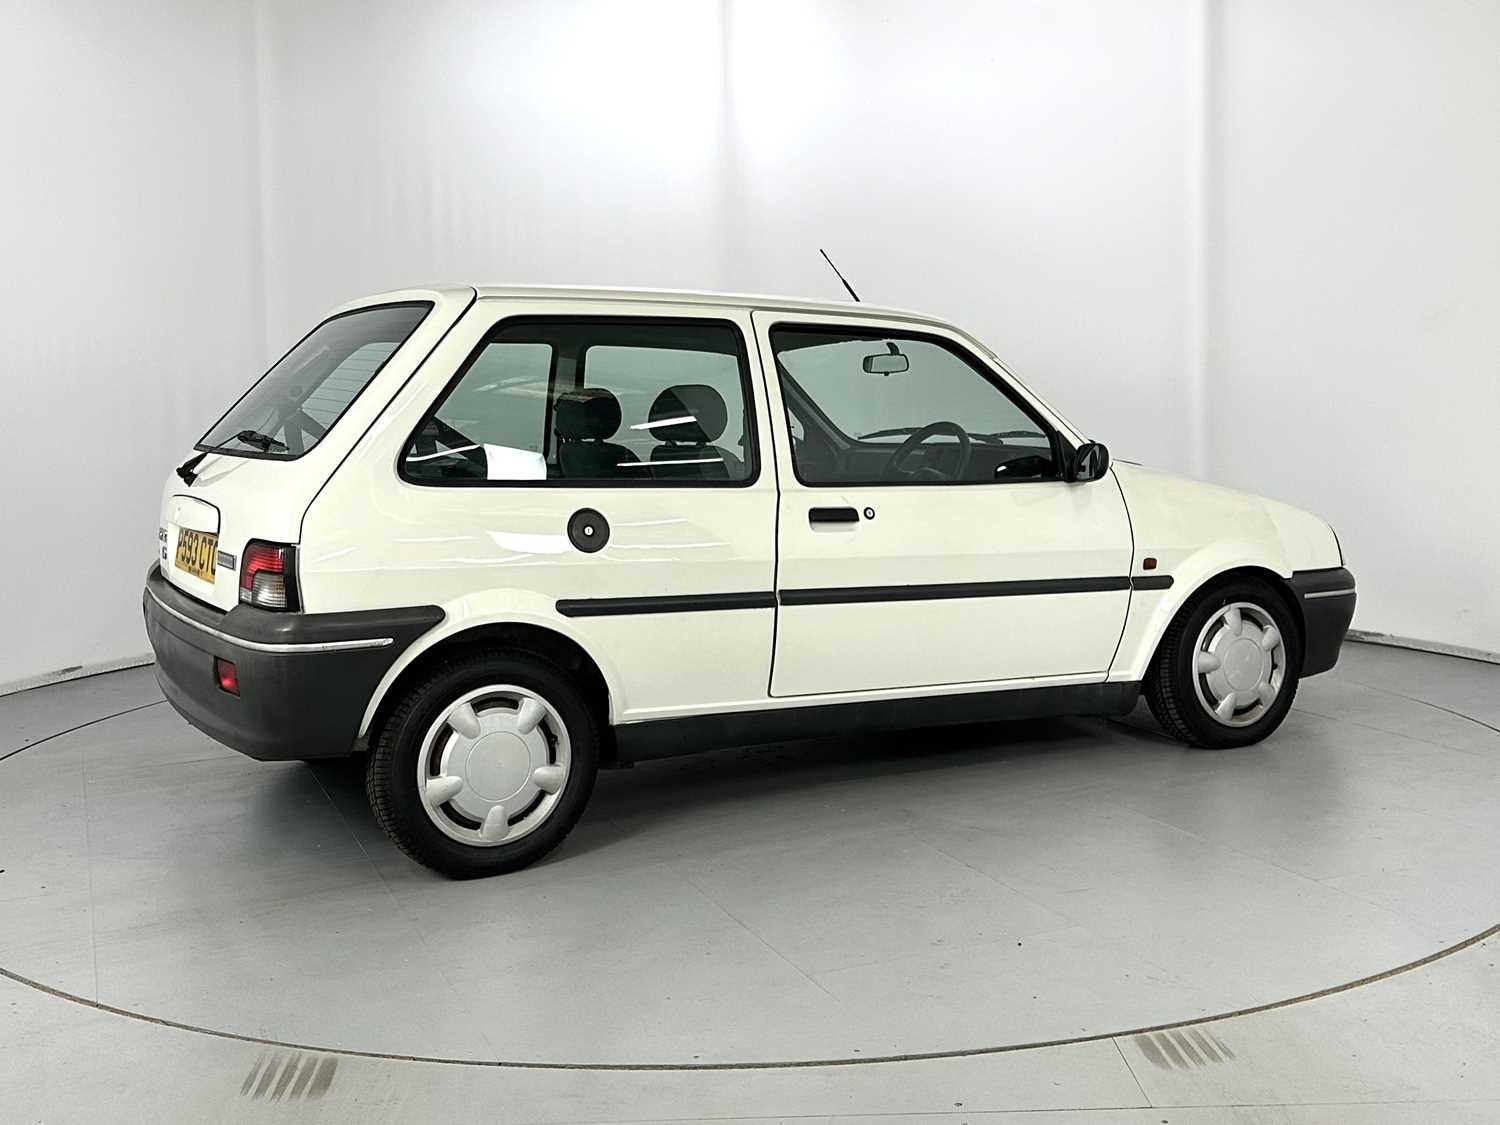 1996 Rover Metro - NO RESERVE 13,000 miles! - Image 10 of 29